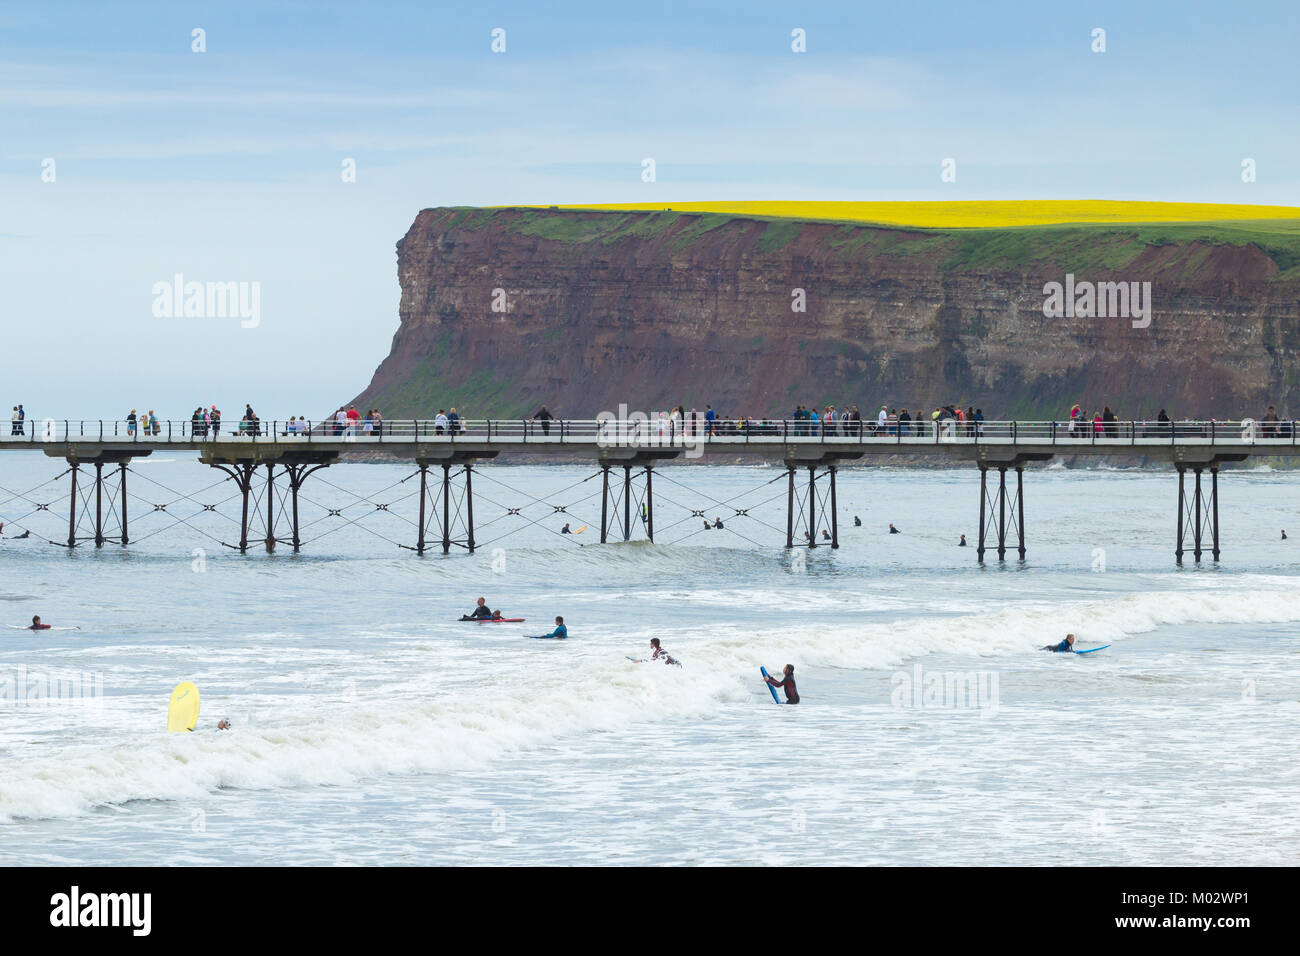 Surfers near Saltburn`s Victorian pier with walkers on cliff footpath (The Cleveland Way) in distance. Saltburn by the sea, Yorkshire, England. UK Stock Photo